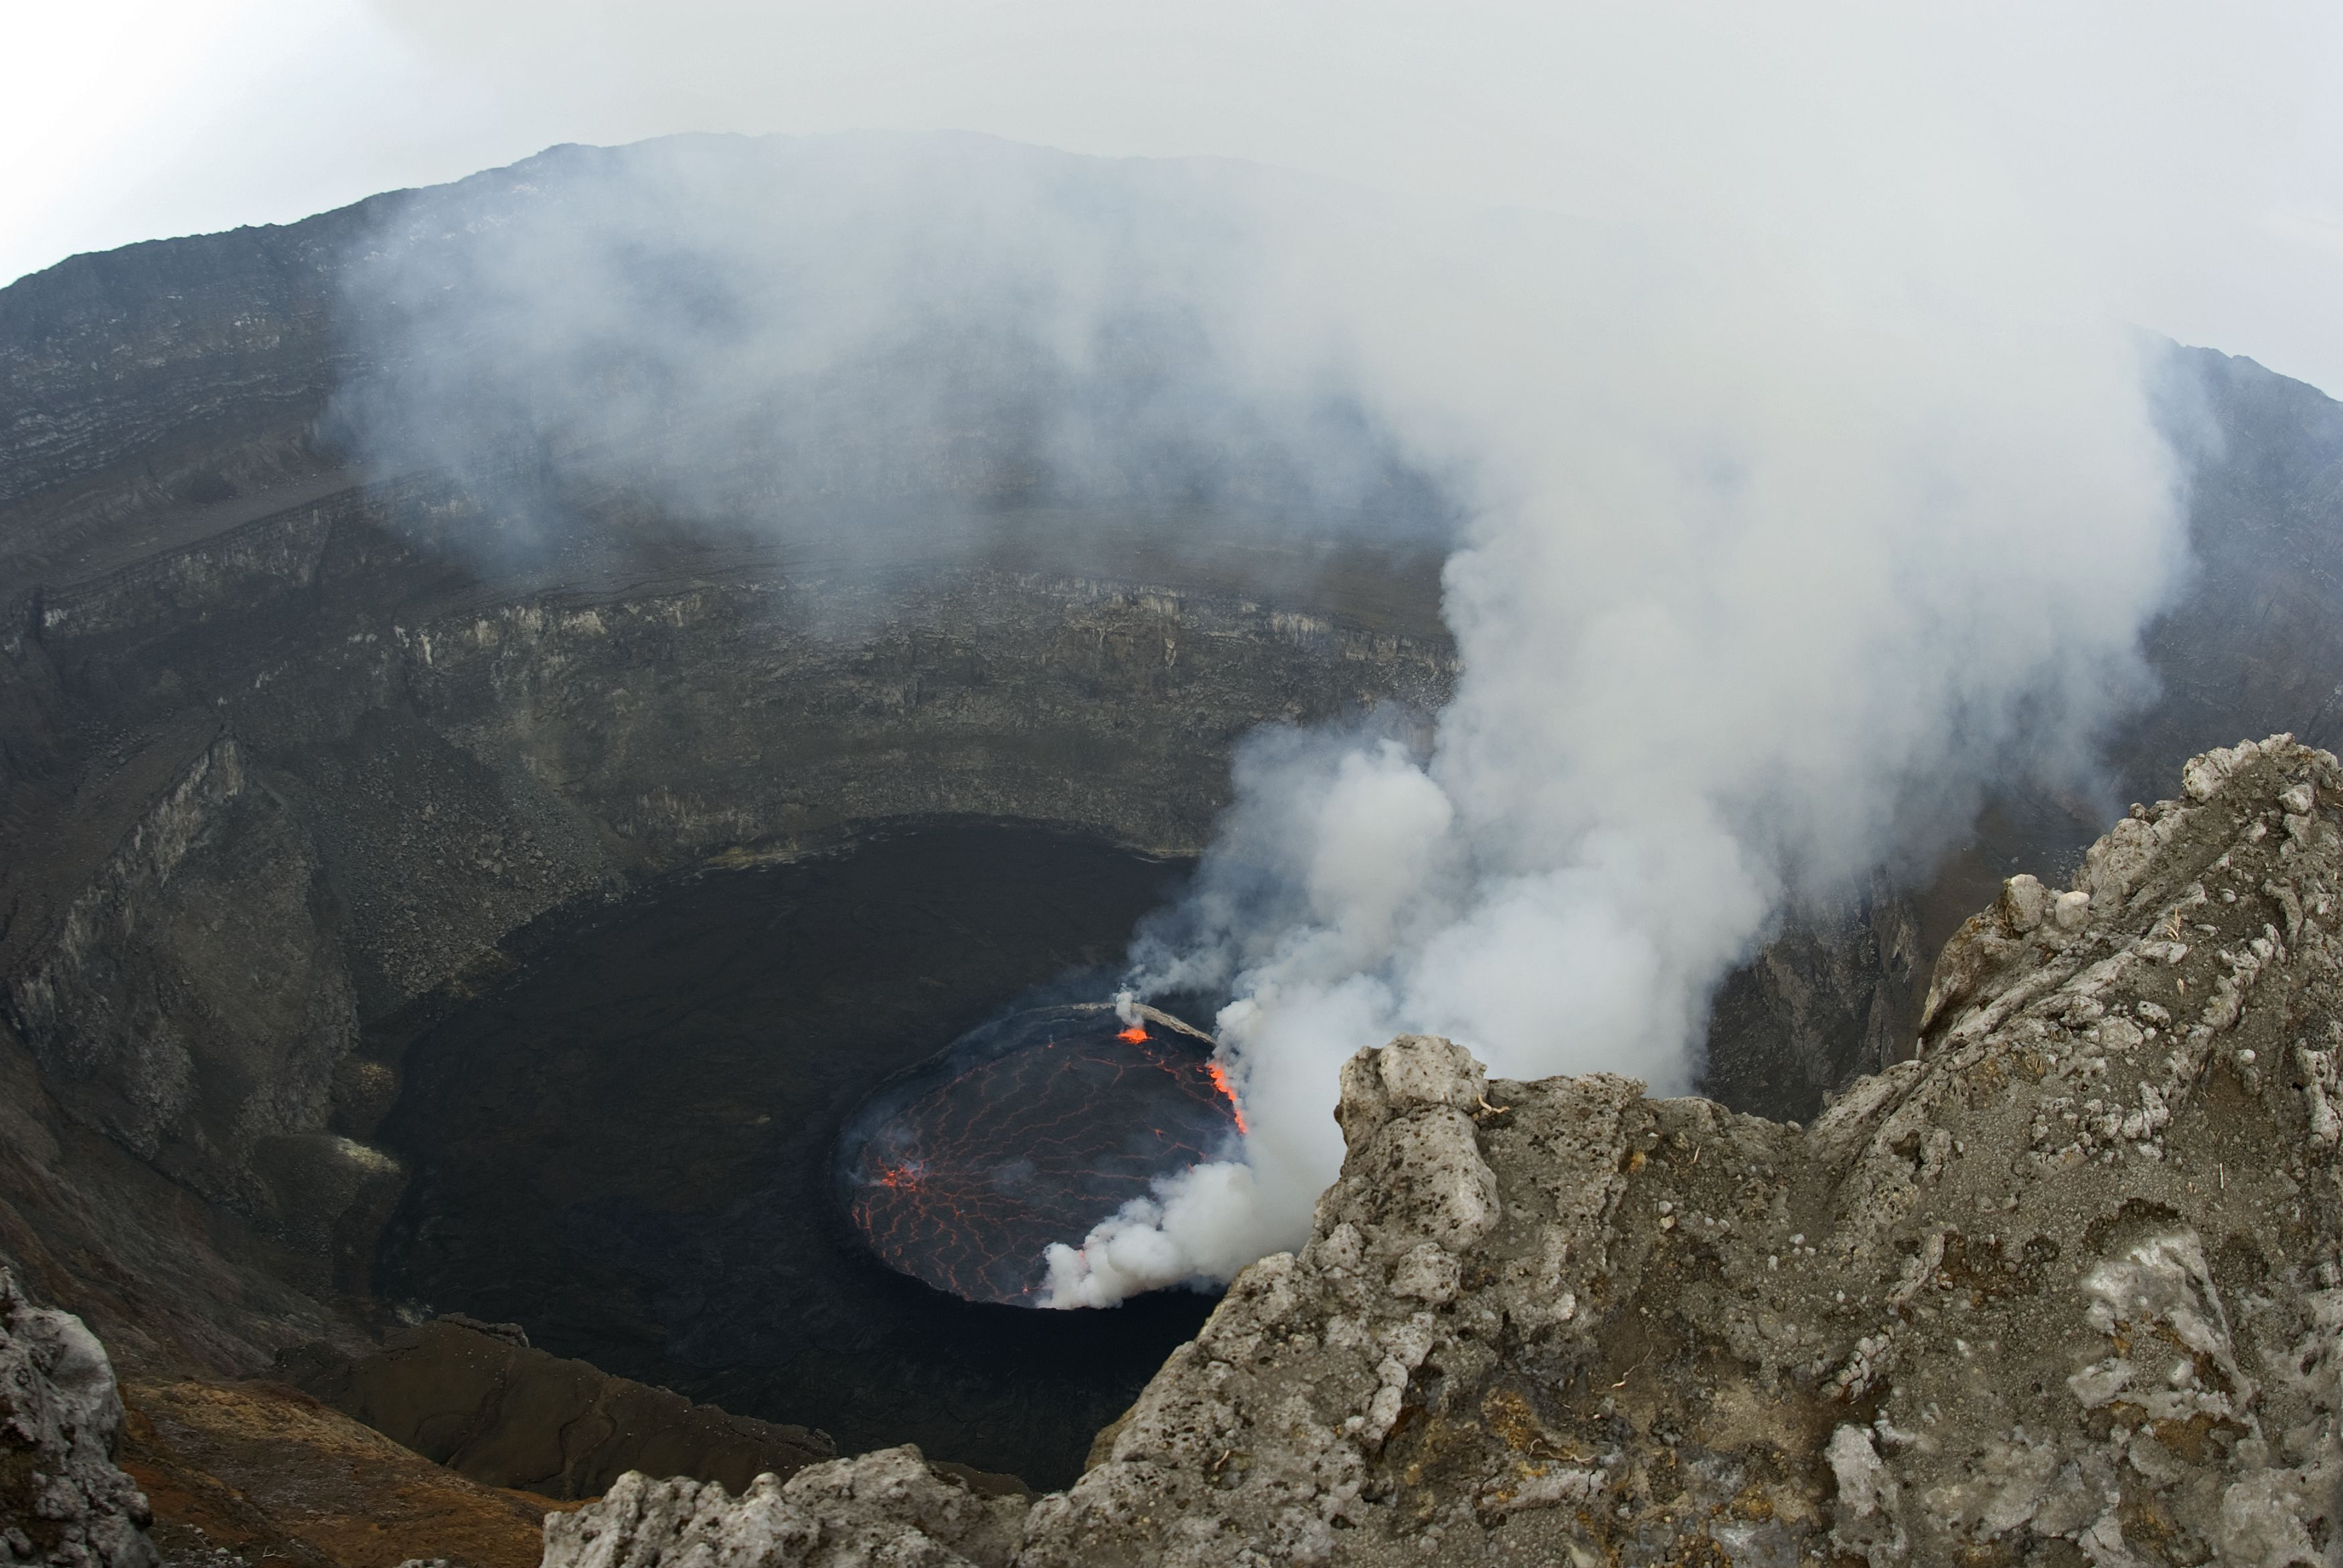 <p><b>Democratic Republic of the Congo<br>Elevation:</b> 11,384 feet<br>The Democratic Republic of Congo’s Nyiragongo hosts the world’s largest lava lake and is one of <a href="https://www.bbc.com/news/world-africa-57280509">Africa's most active volcanoes</a>. It’s not only the volcano <a href="https://visit.virunga.org/treks/nyiragongo-volcano-trek/">that attracts tourists</a> to see it; the beautiful landscape and the rich culture also help to make it a must visit. Visitors also come to see Kivu, a crater lake located less than a mile away.      </p>